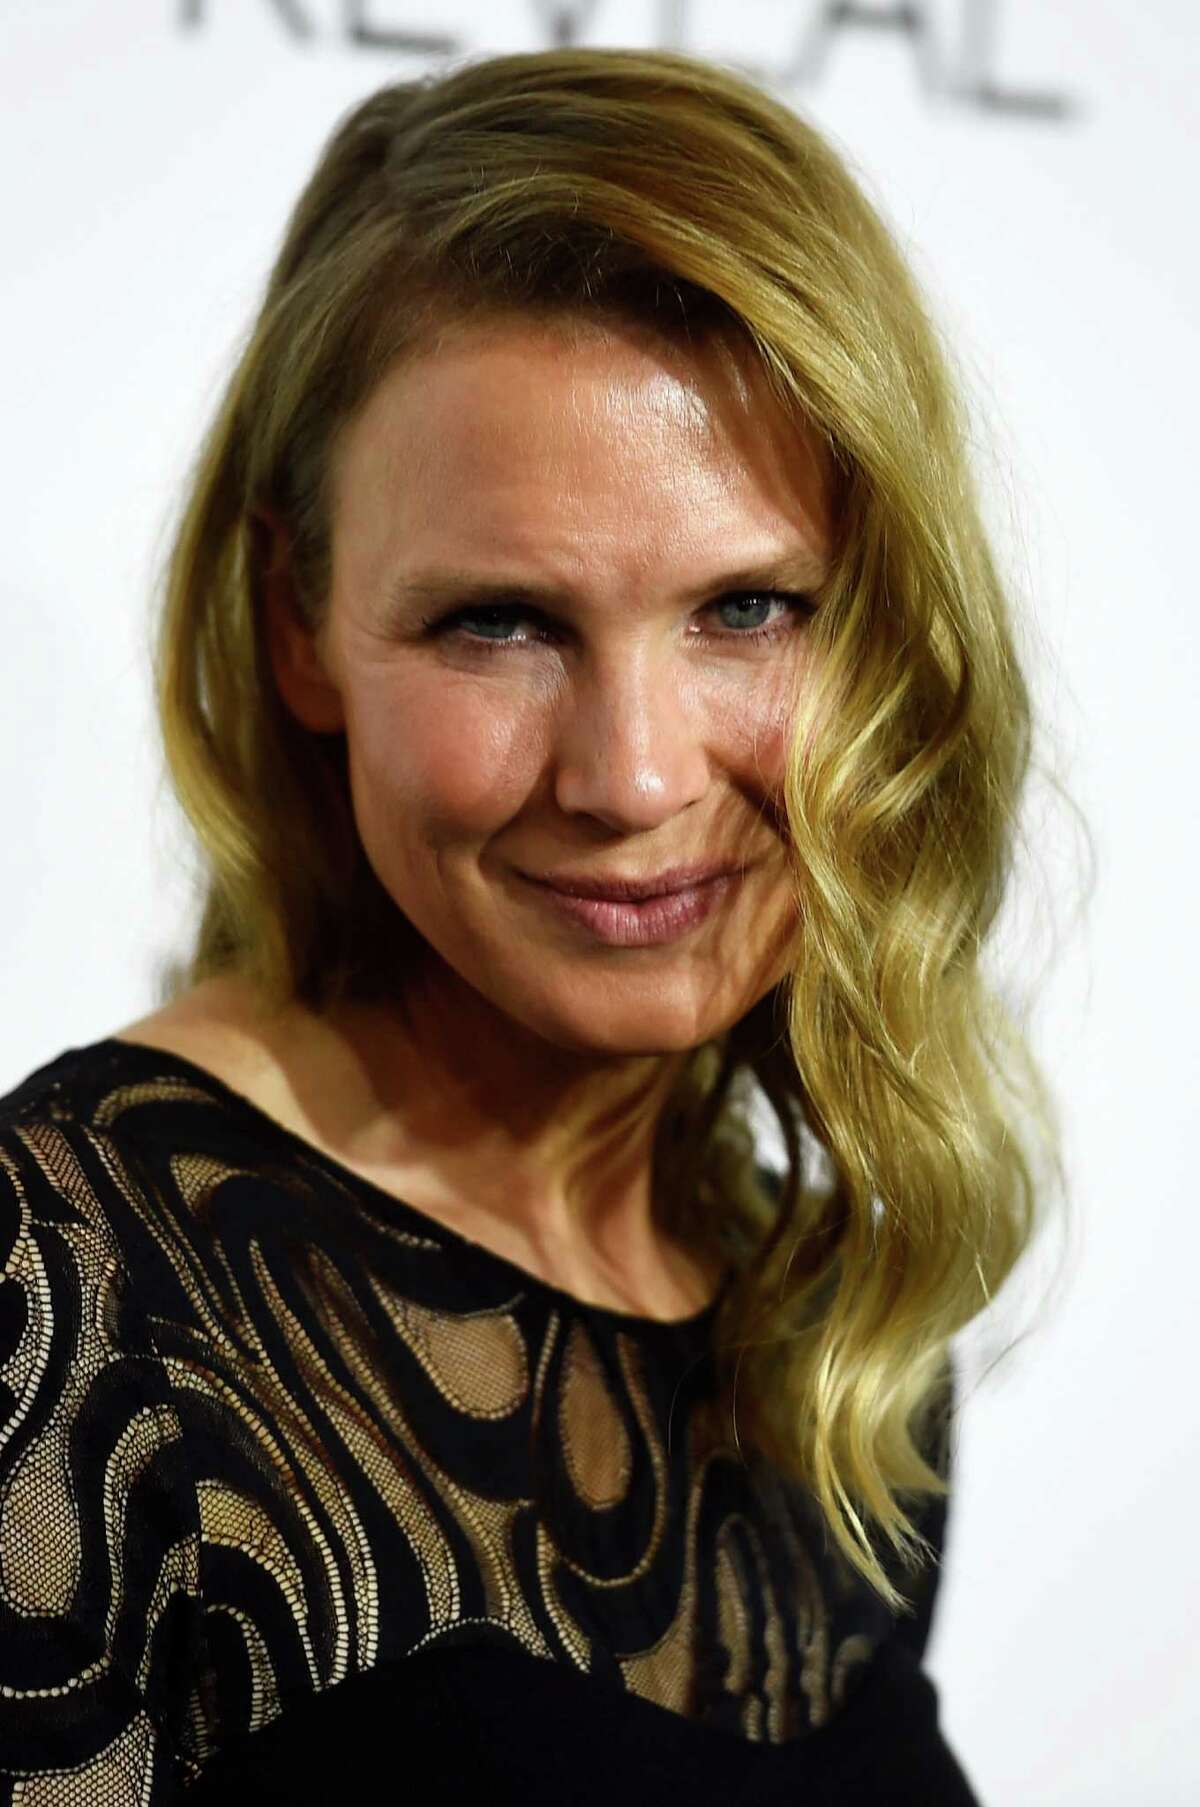 AFTER: Zellweger unveiled her new face on October 20, 2014 in Beverly Hills, California. Shocking, we know. The star looks more like Glenn Close or even Sarah Jessica Parker than her real self.She's not the only star to go under the knife. Take a look at other celebs who are reported to have had plastic surgery.